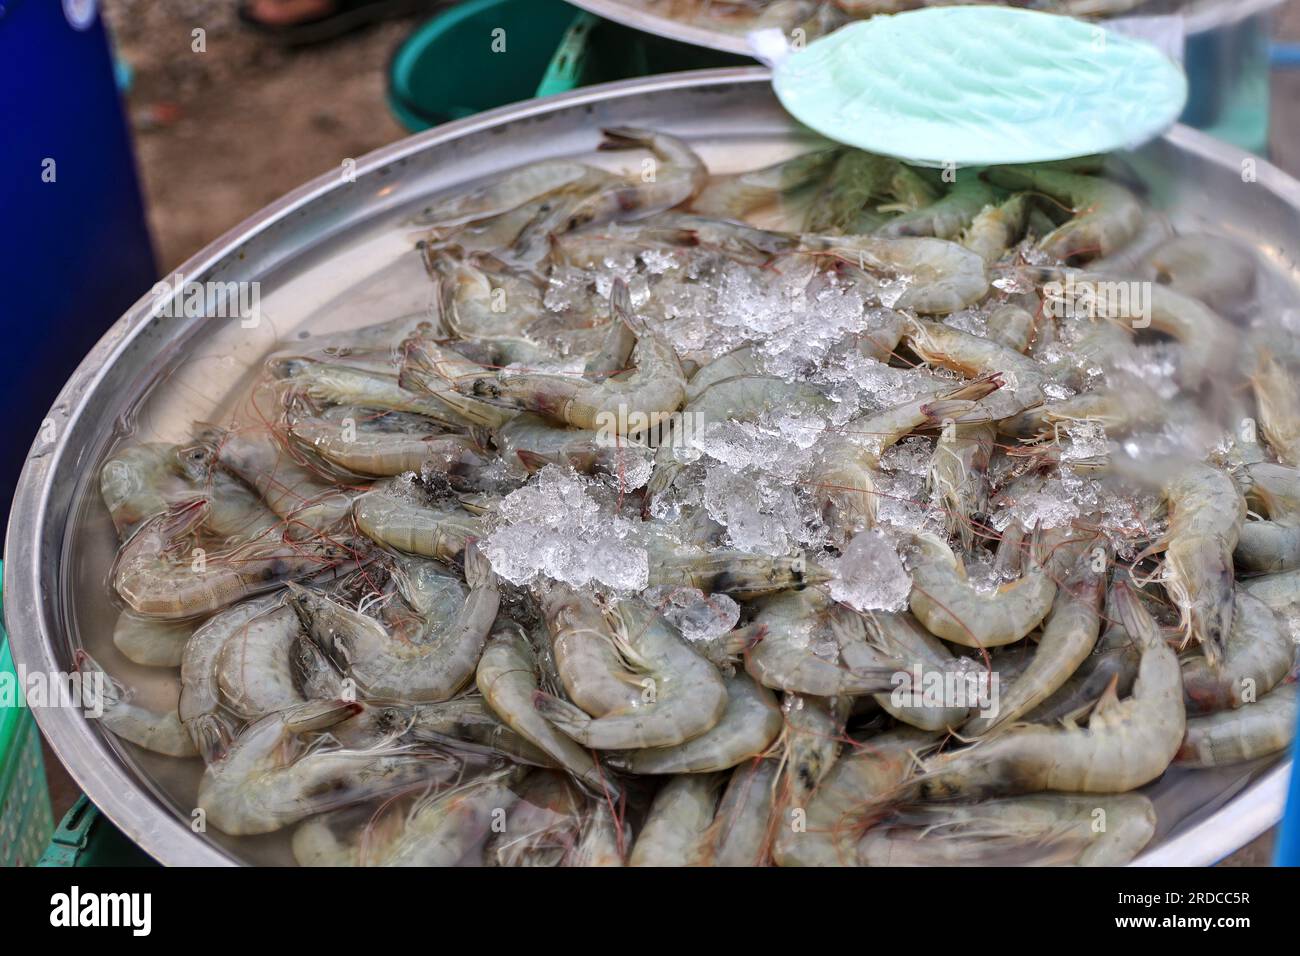 Freeze shrimp with ice to prevent spoilage. Put stainless steel trays for sale at the community market. Stock Photo